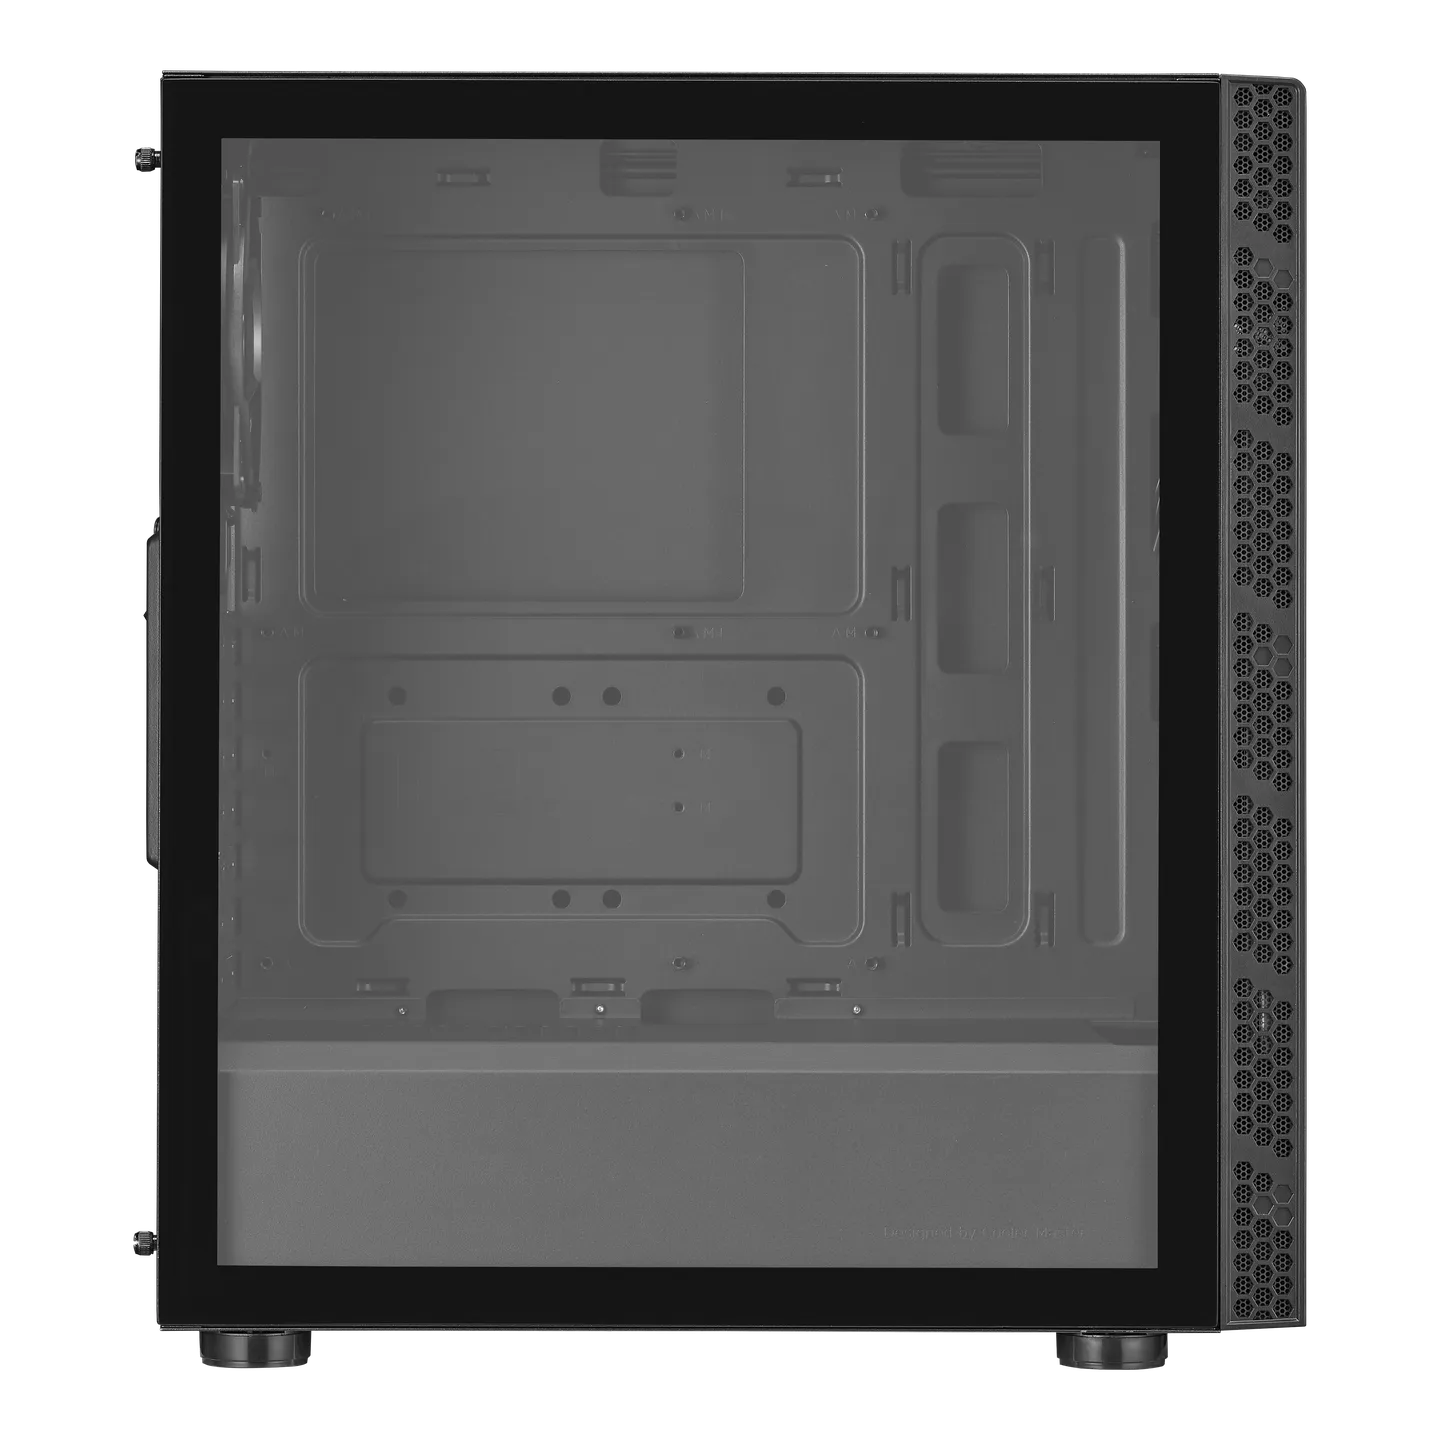 Cooler Master MB 600 V2 Mid Tower Cabinet with Tempered Glass